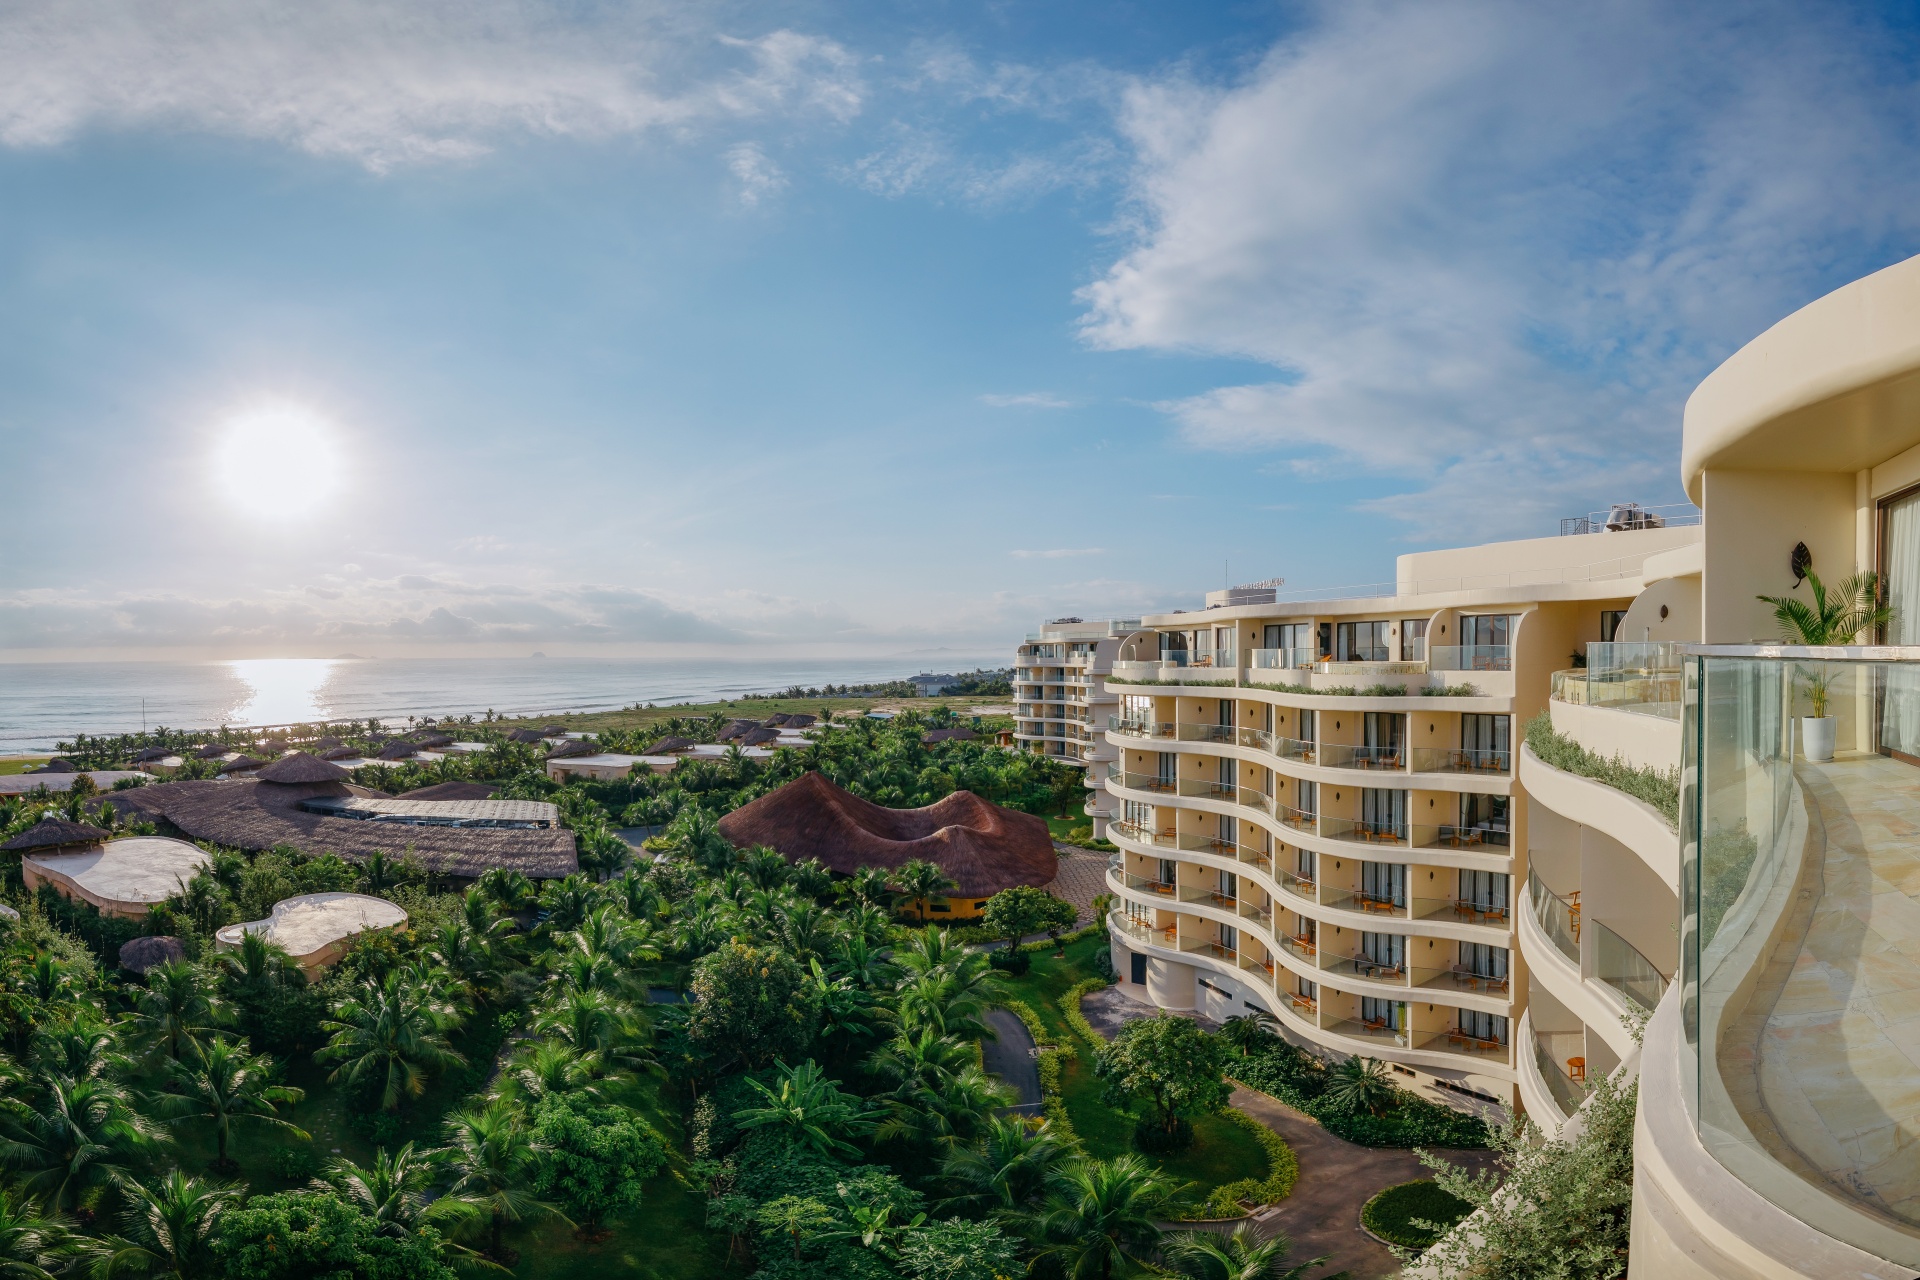 Ana Mandara Cam Ranh has captured the hearts of both domestic and international visitors through its design, deeply rooted in Vietnamese culture and its unmatched premium service offerings.